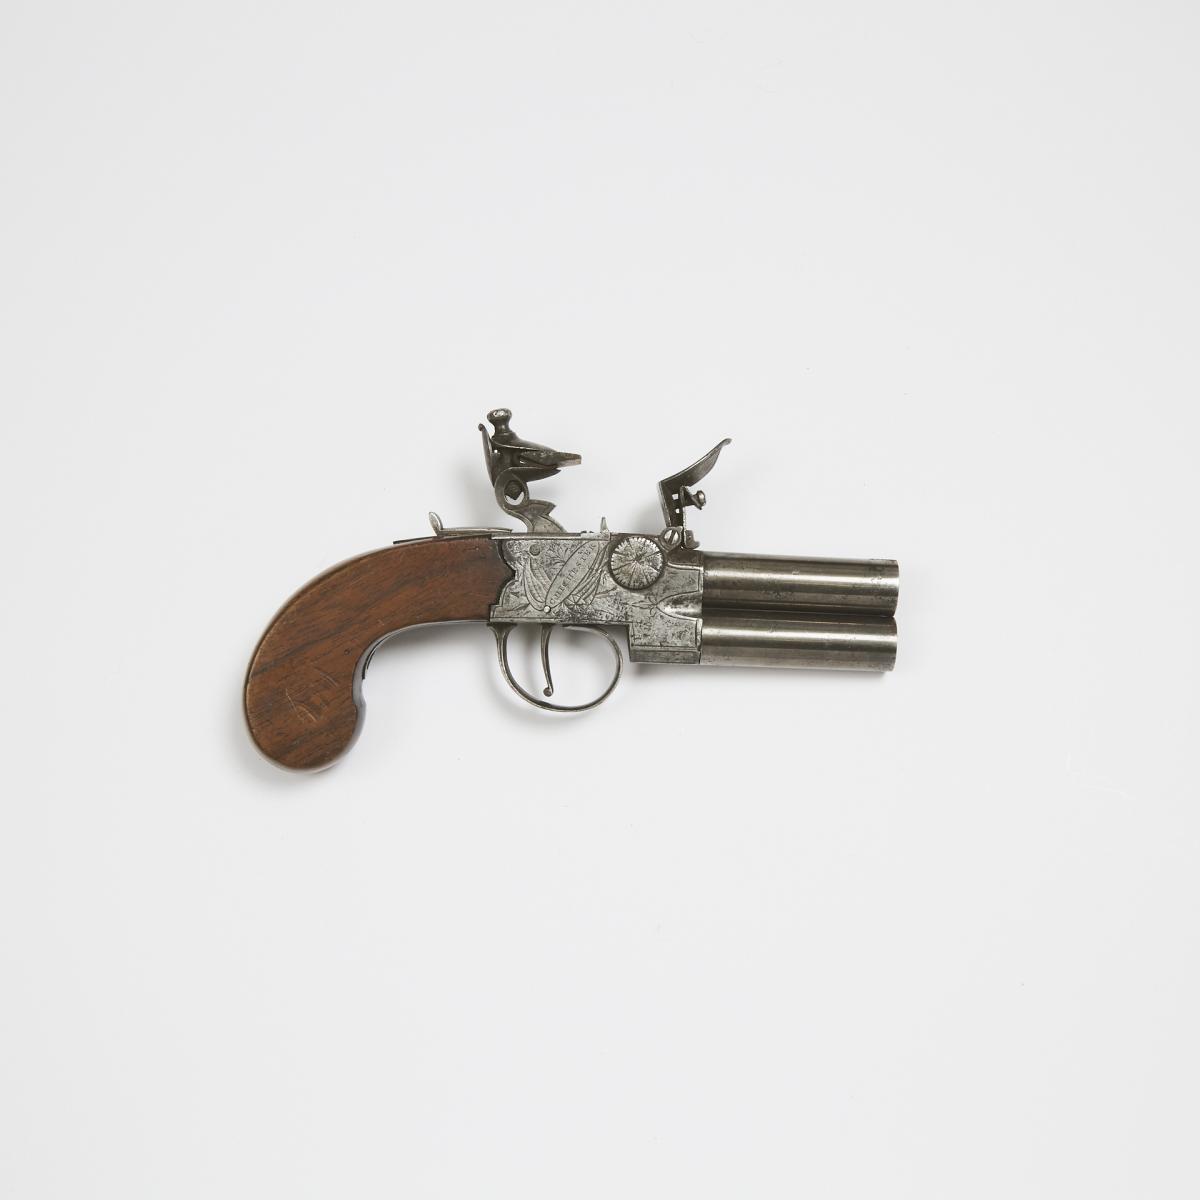 British Over-and-Under Double Barrel Flint-Boxlock Pocket Pistol, Moore, Chichester, late 18th/early